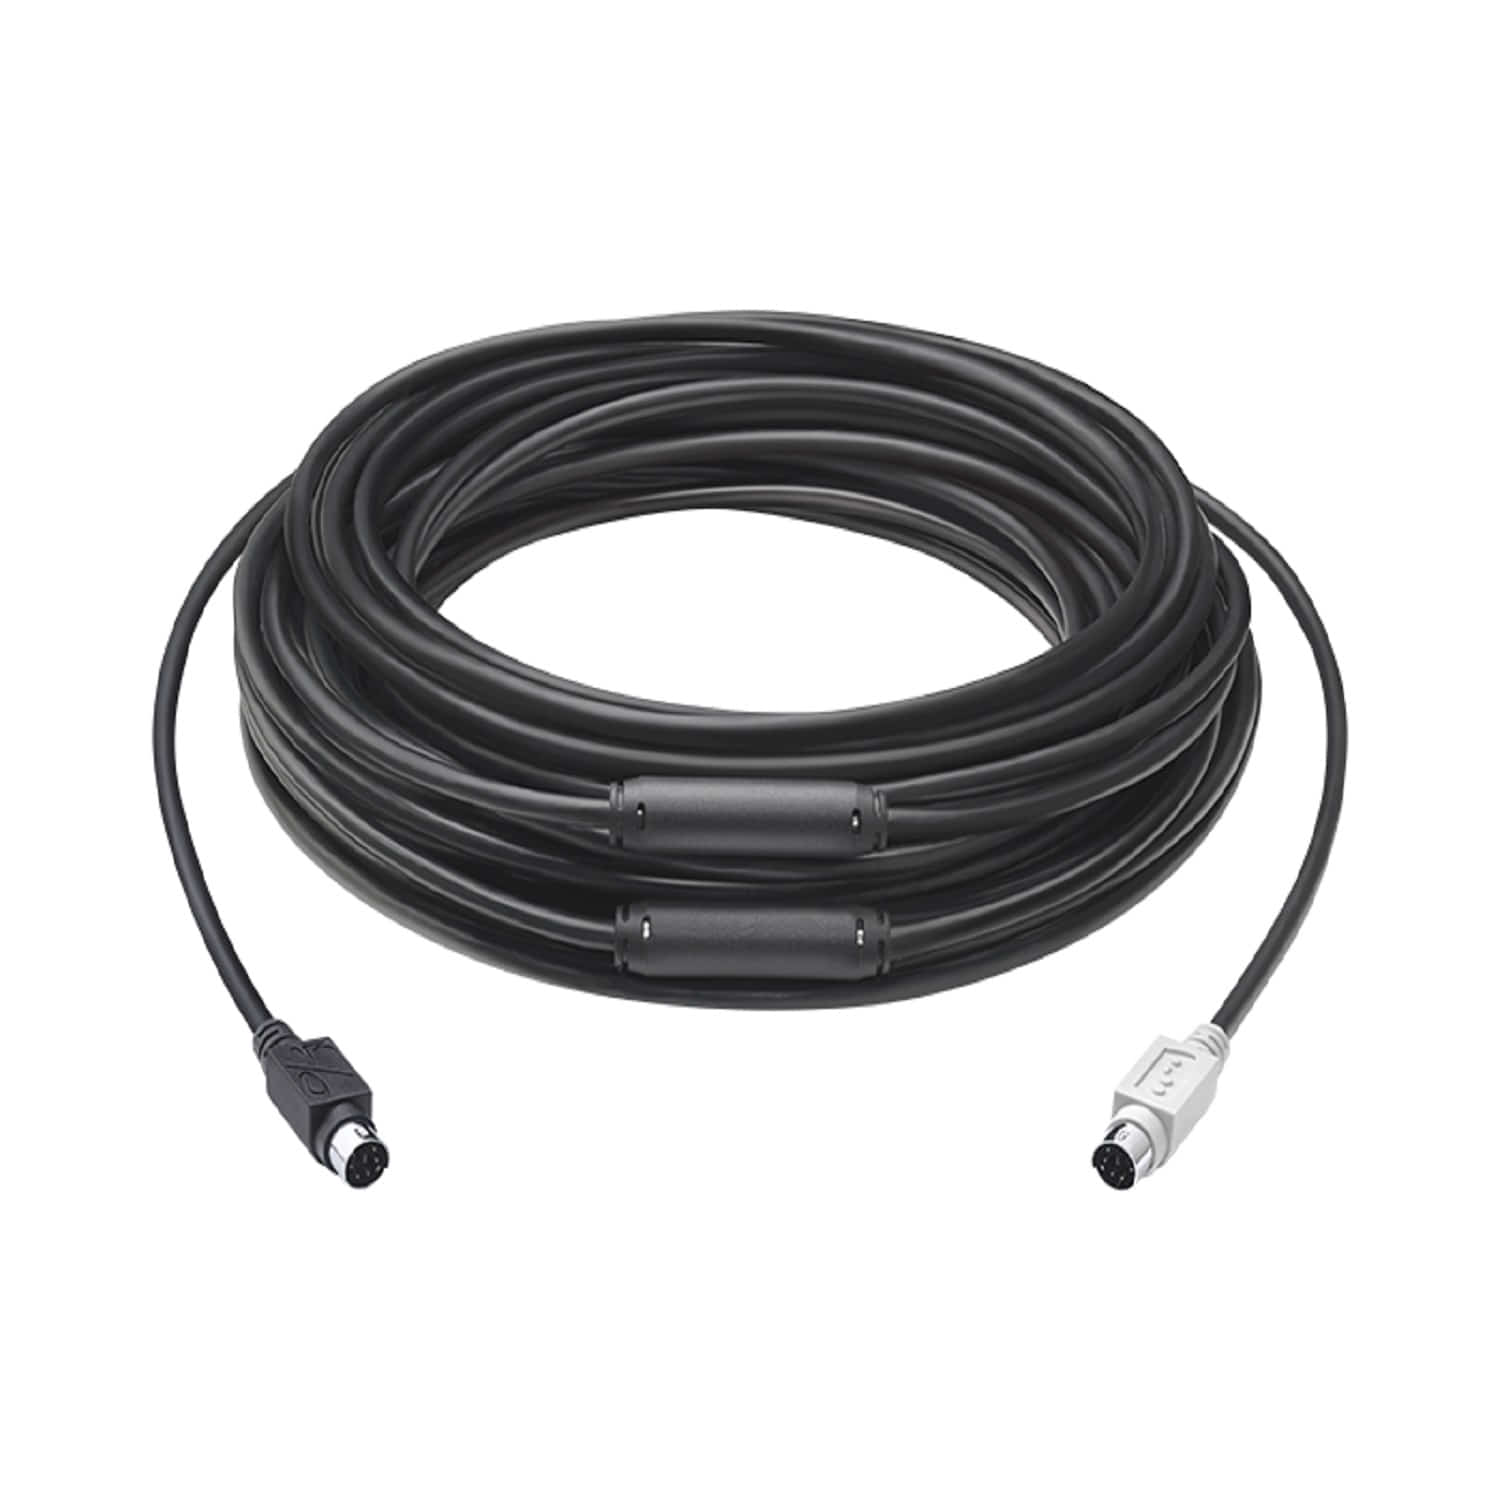 GROUP 15M EXTENDED CABLE , 15 Meter Cable, Ideal for Large Conference Rooms , Logitech